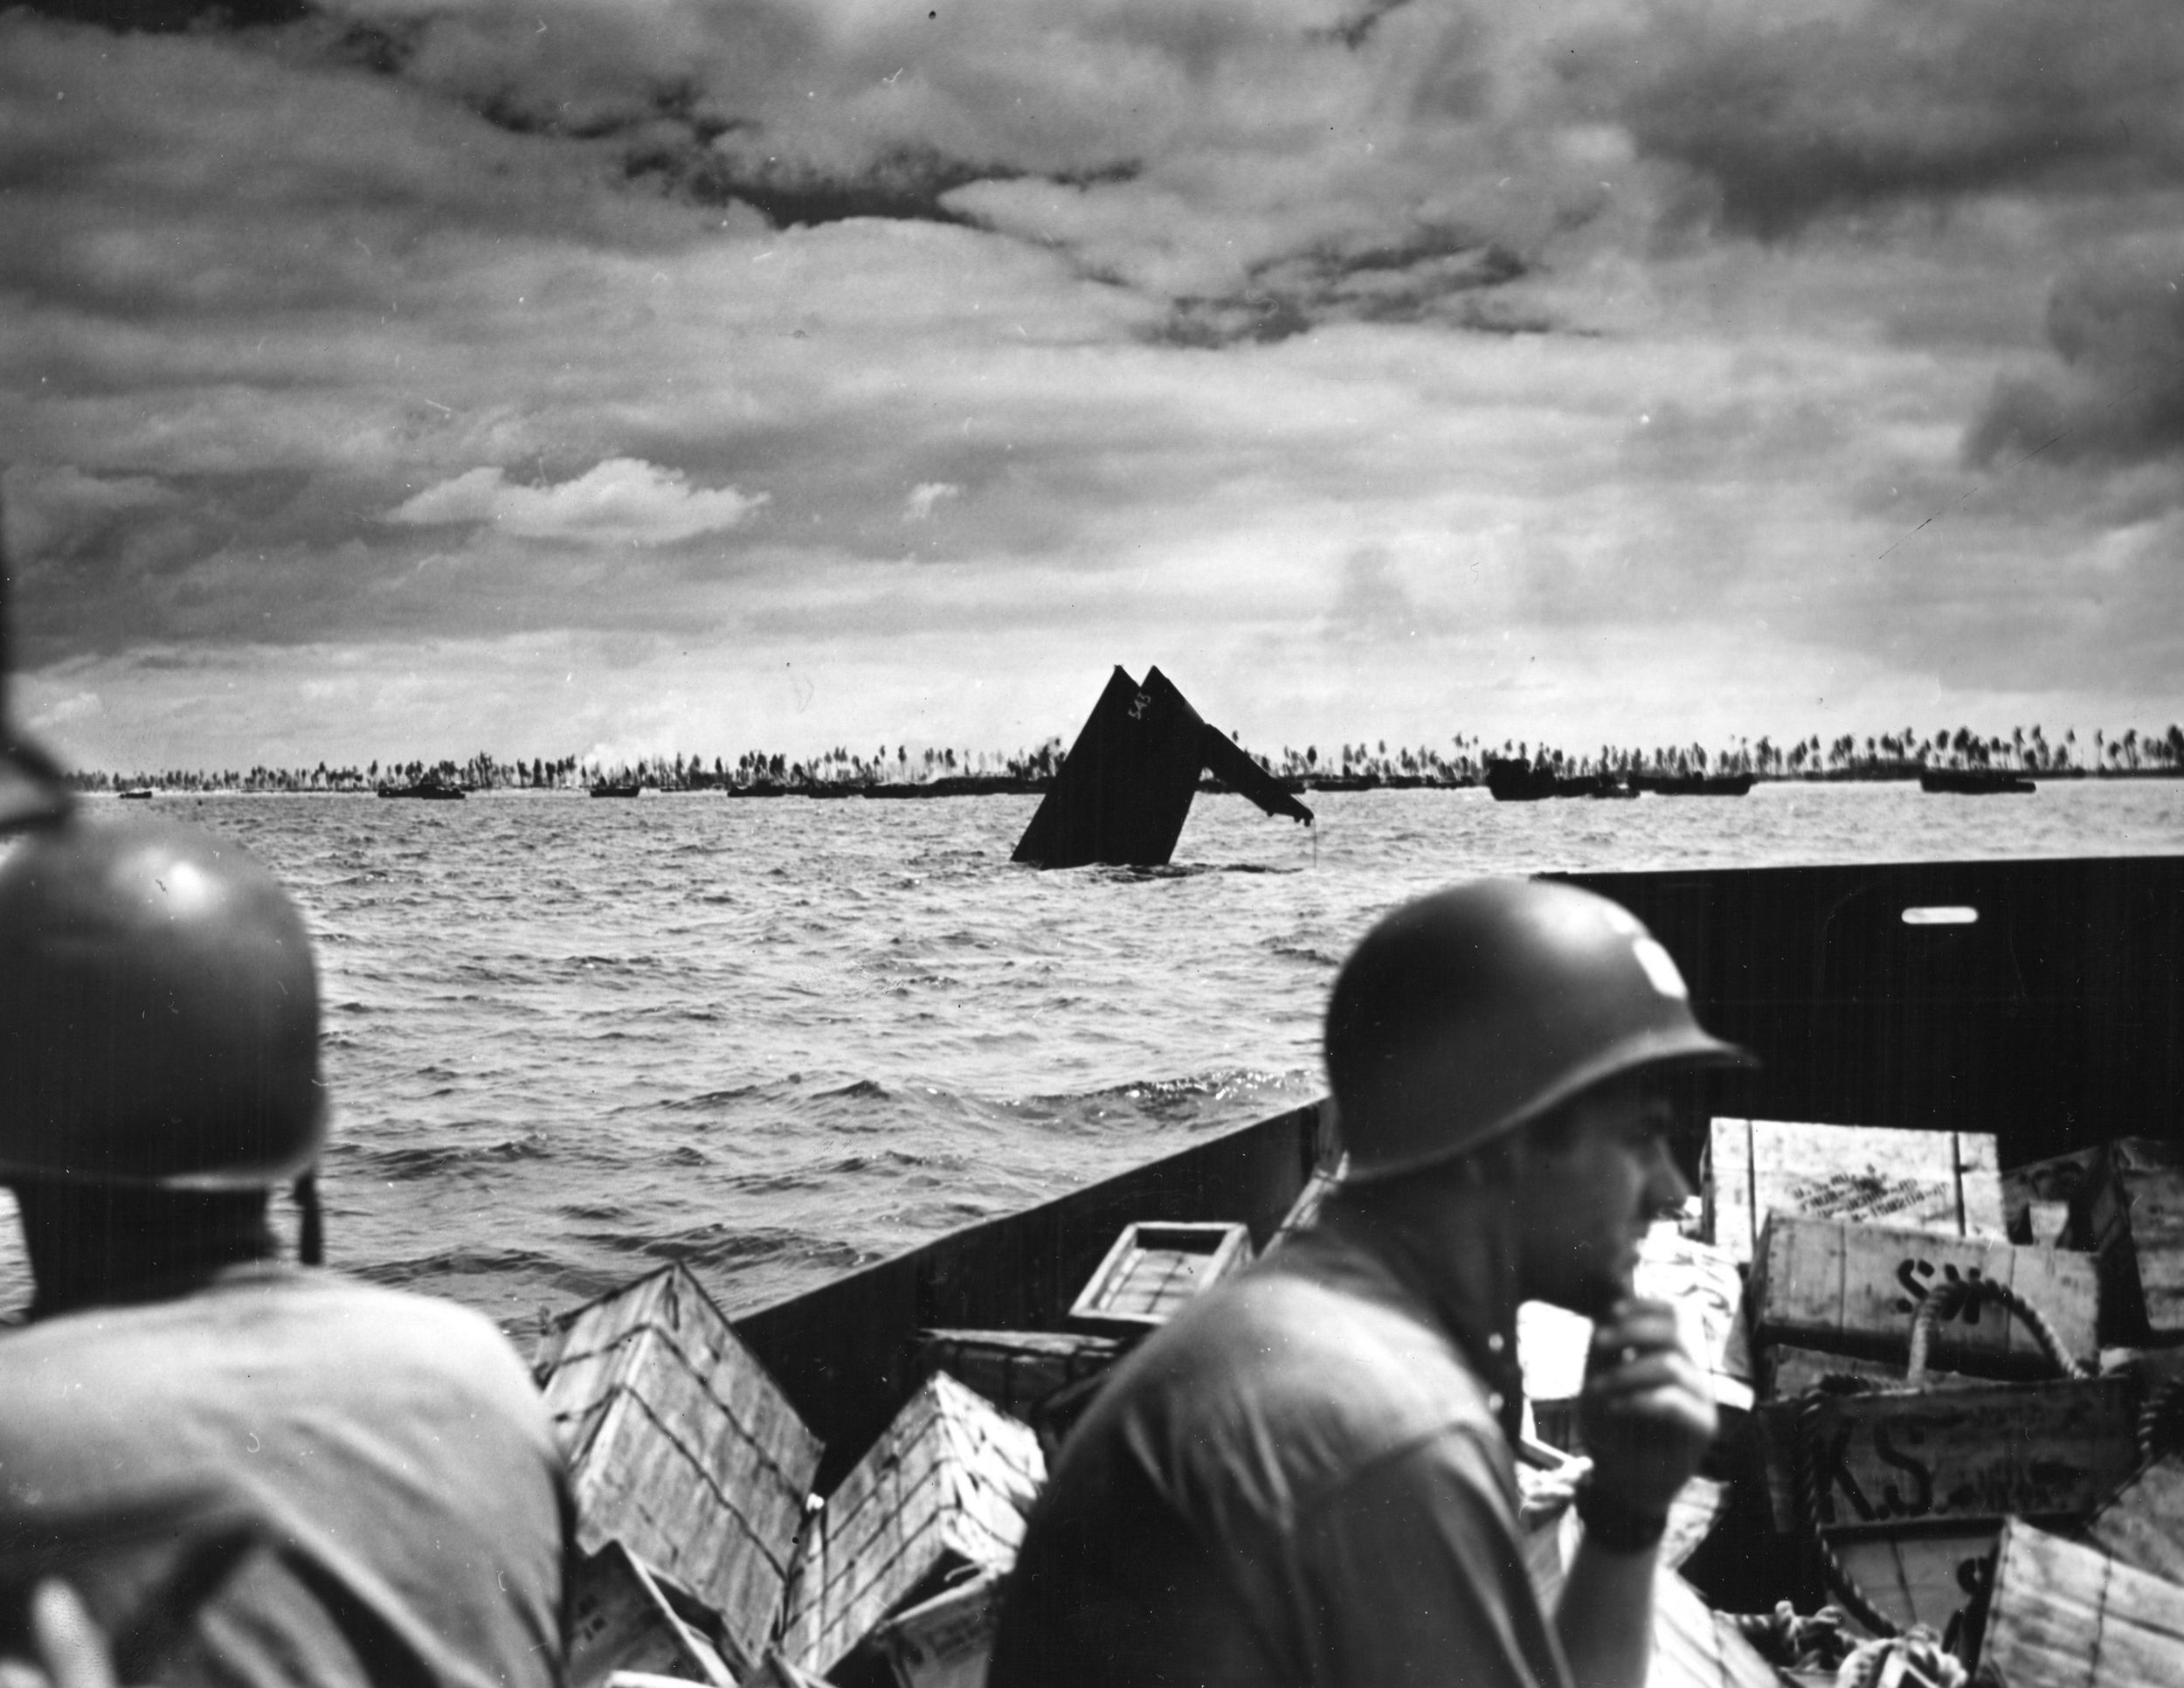 U.S. Coast Guard personnel pass the protruding hull of a sunken American light tanker as they bring supplies to the Betio beachhead.